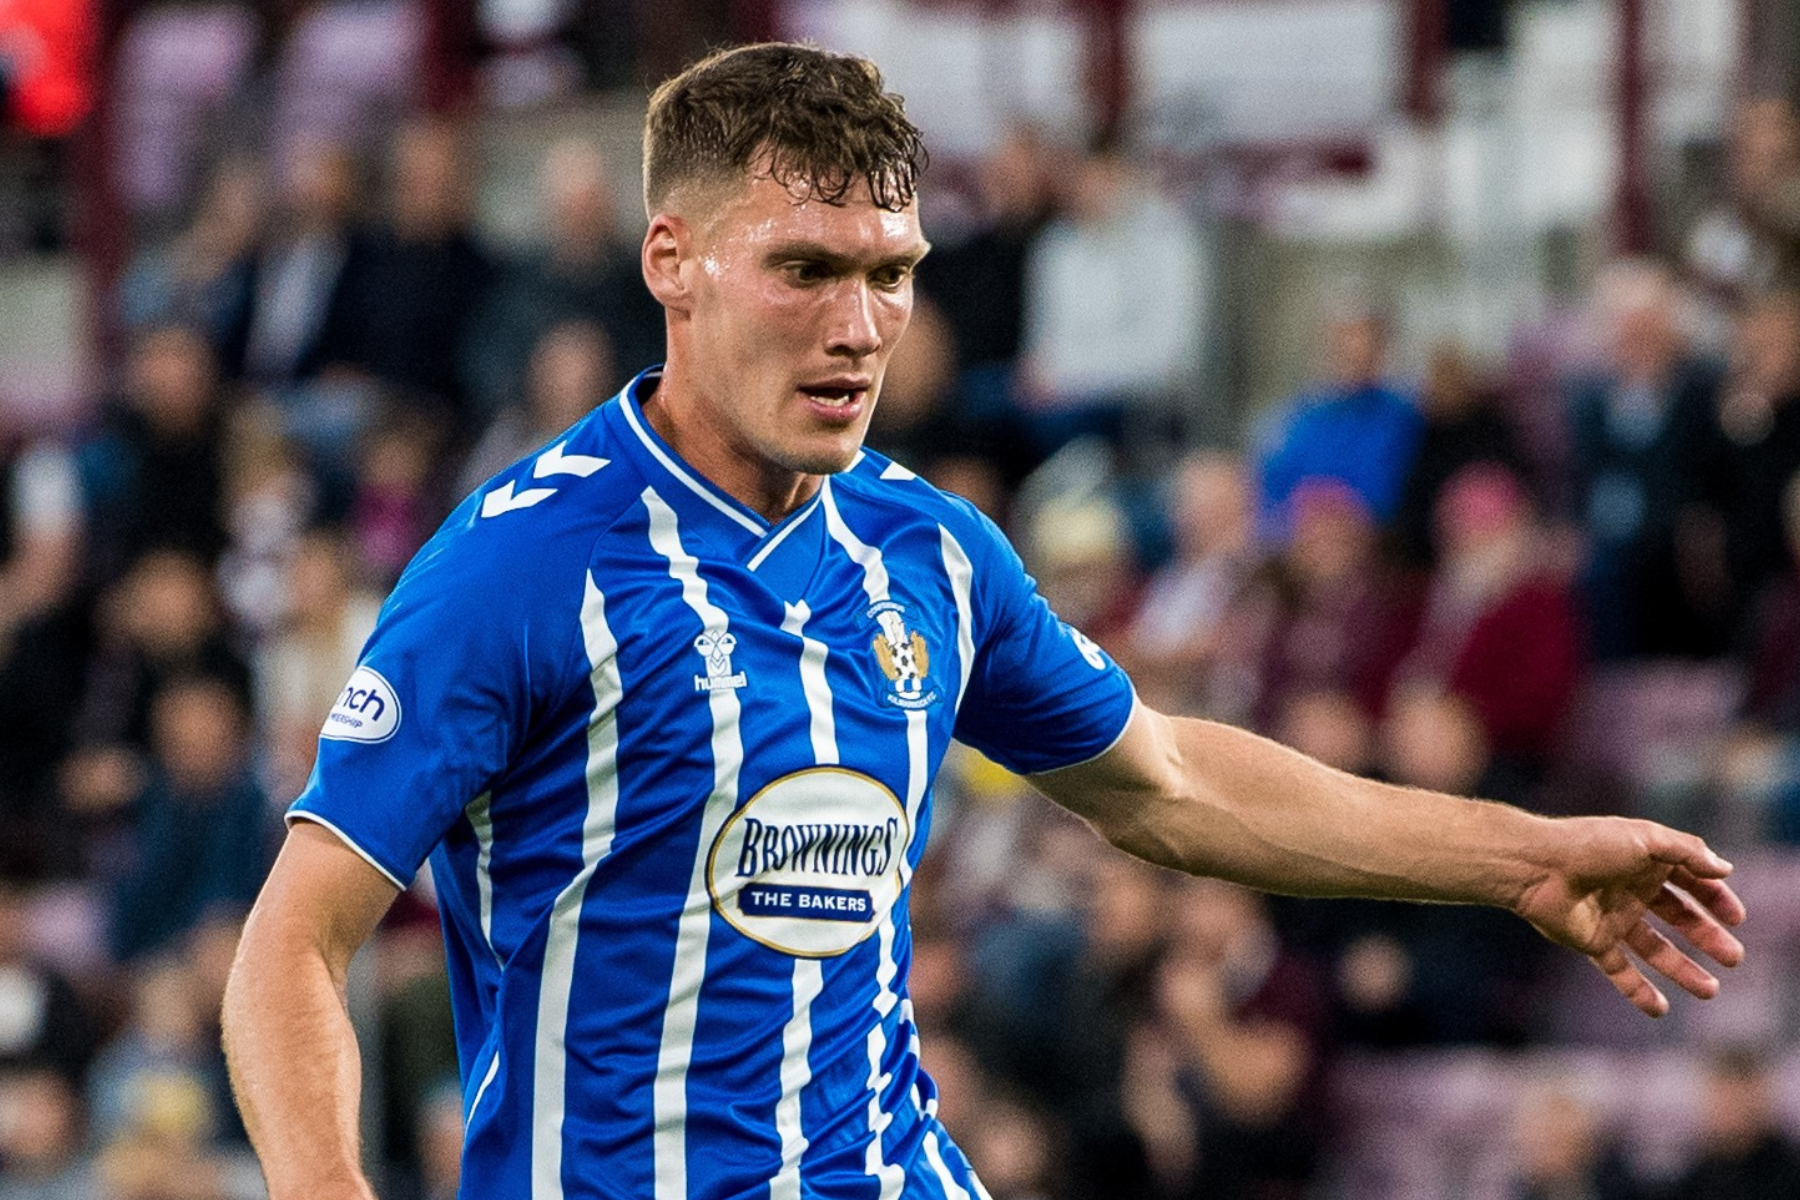 Kilmarnock defender Joe Wright enjoying playing football again after a year on the sidelines